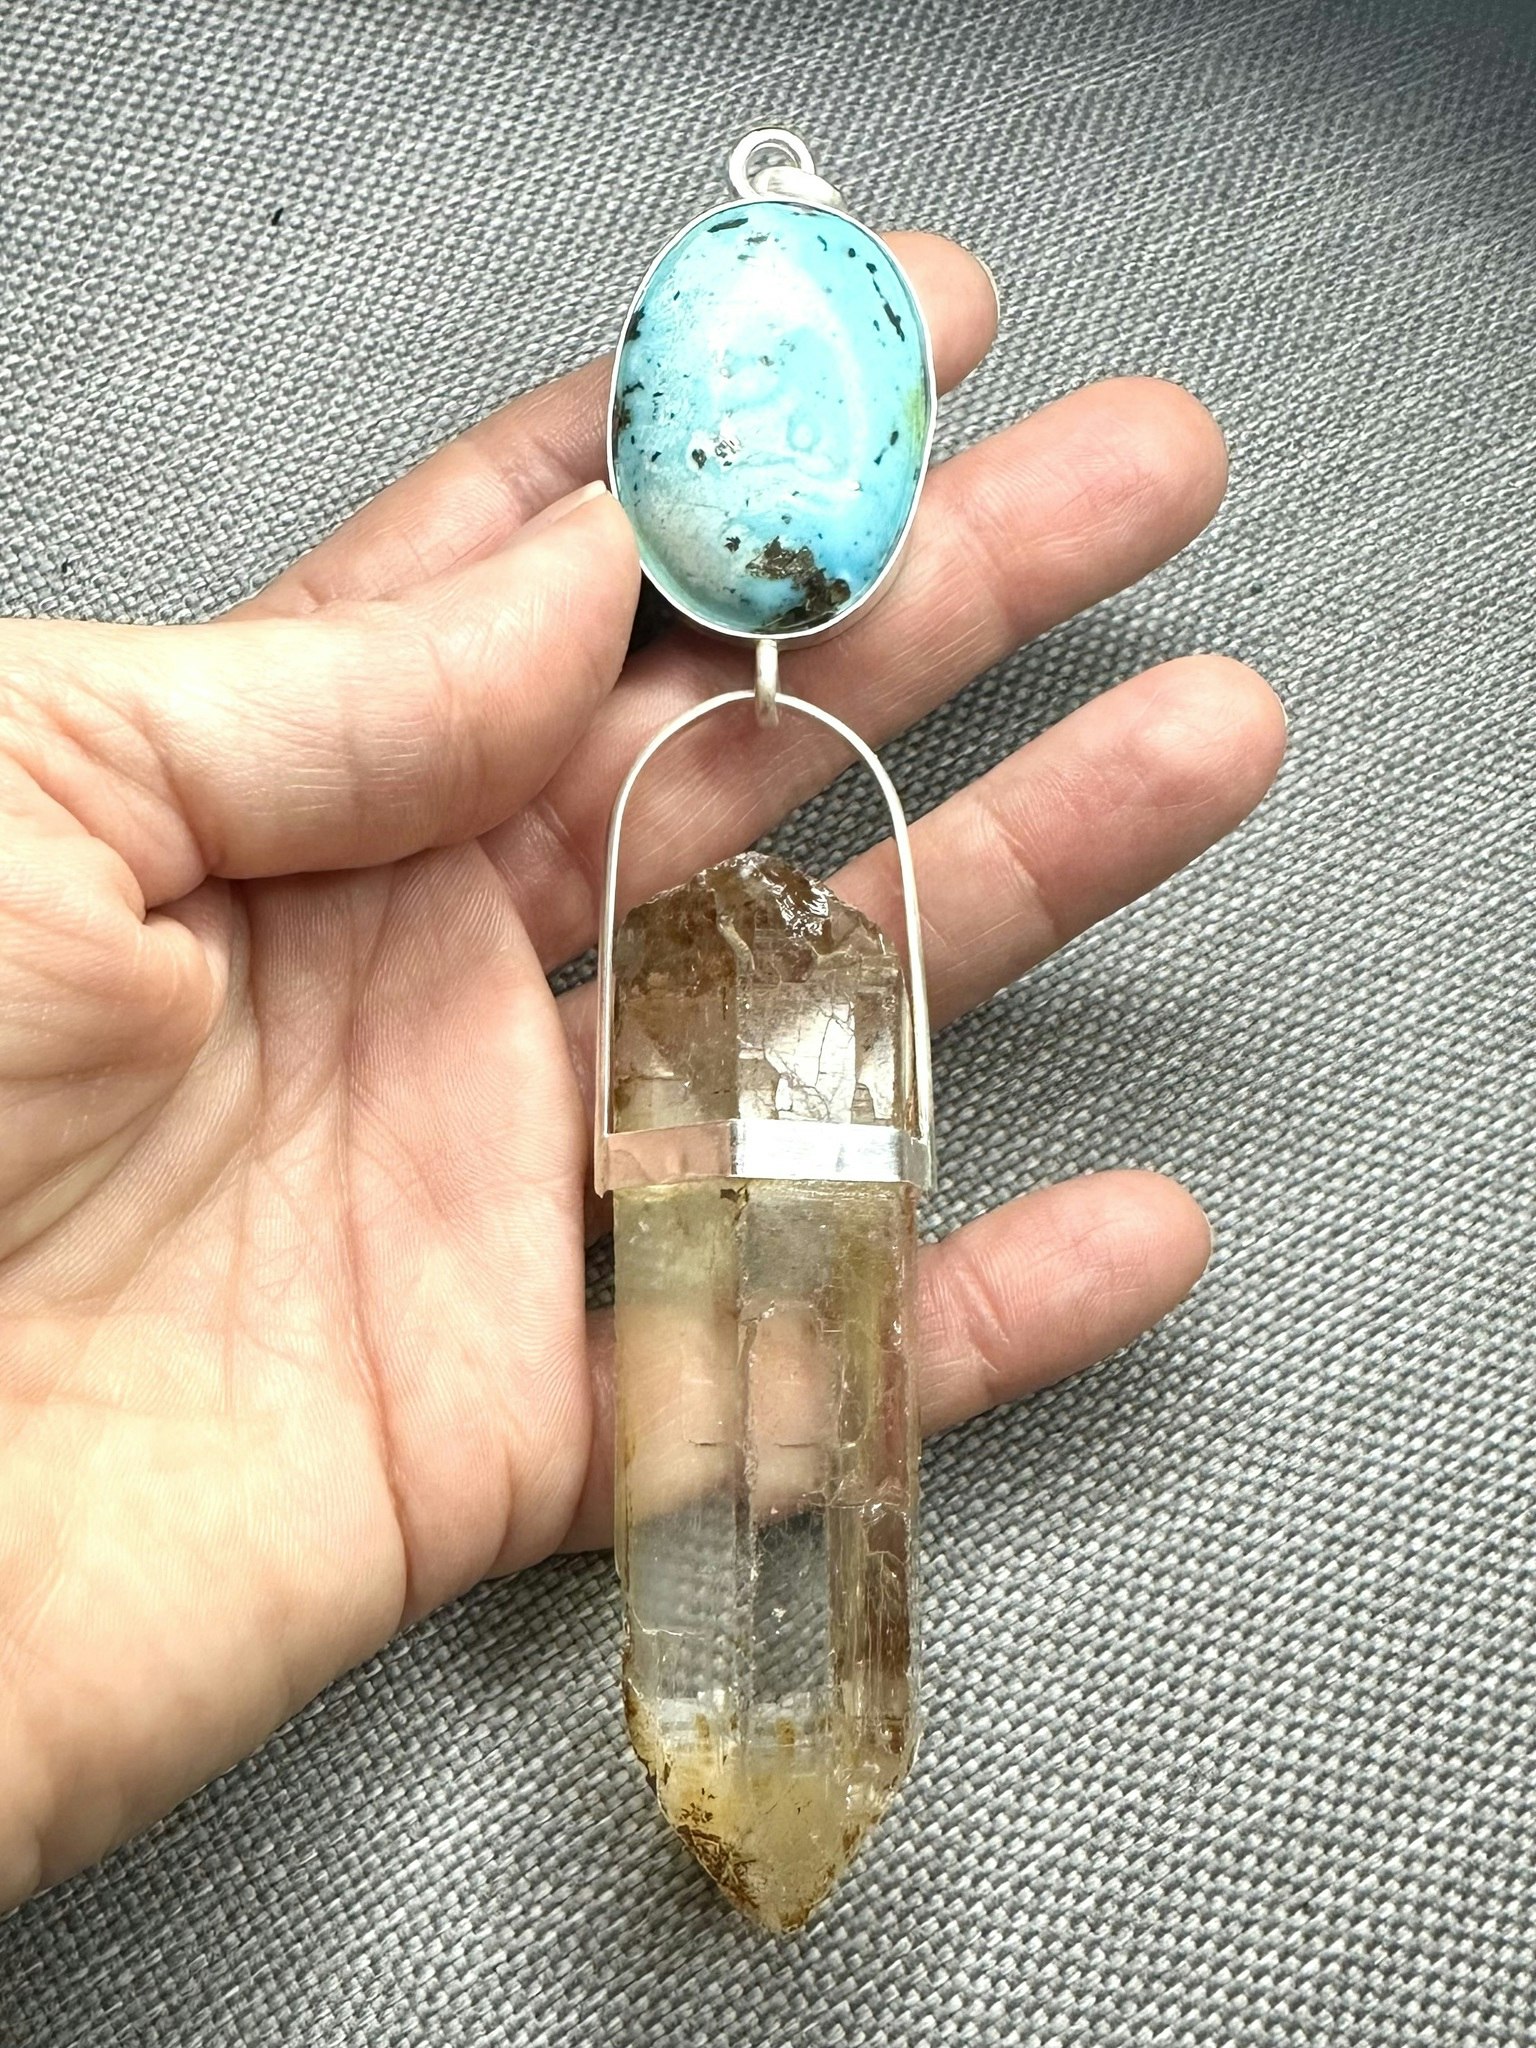 Turquoise with pyrite and quartz crystal from the Himalayas